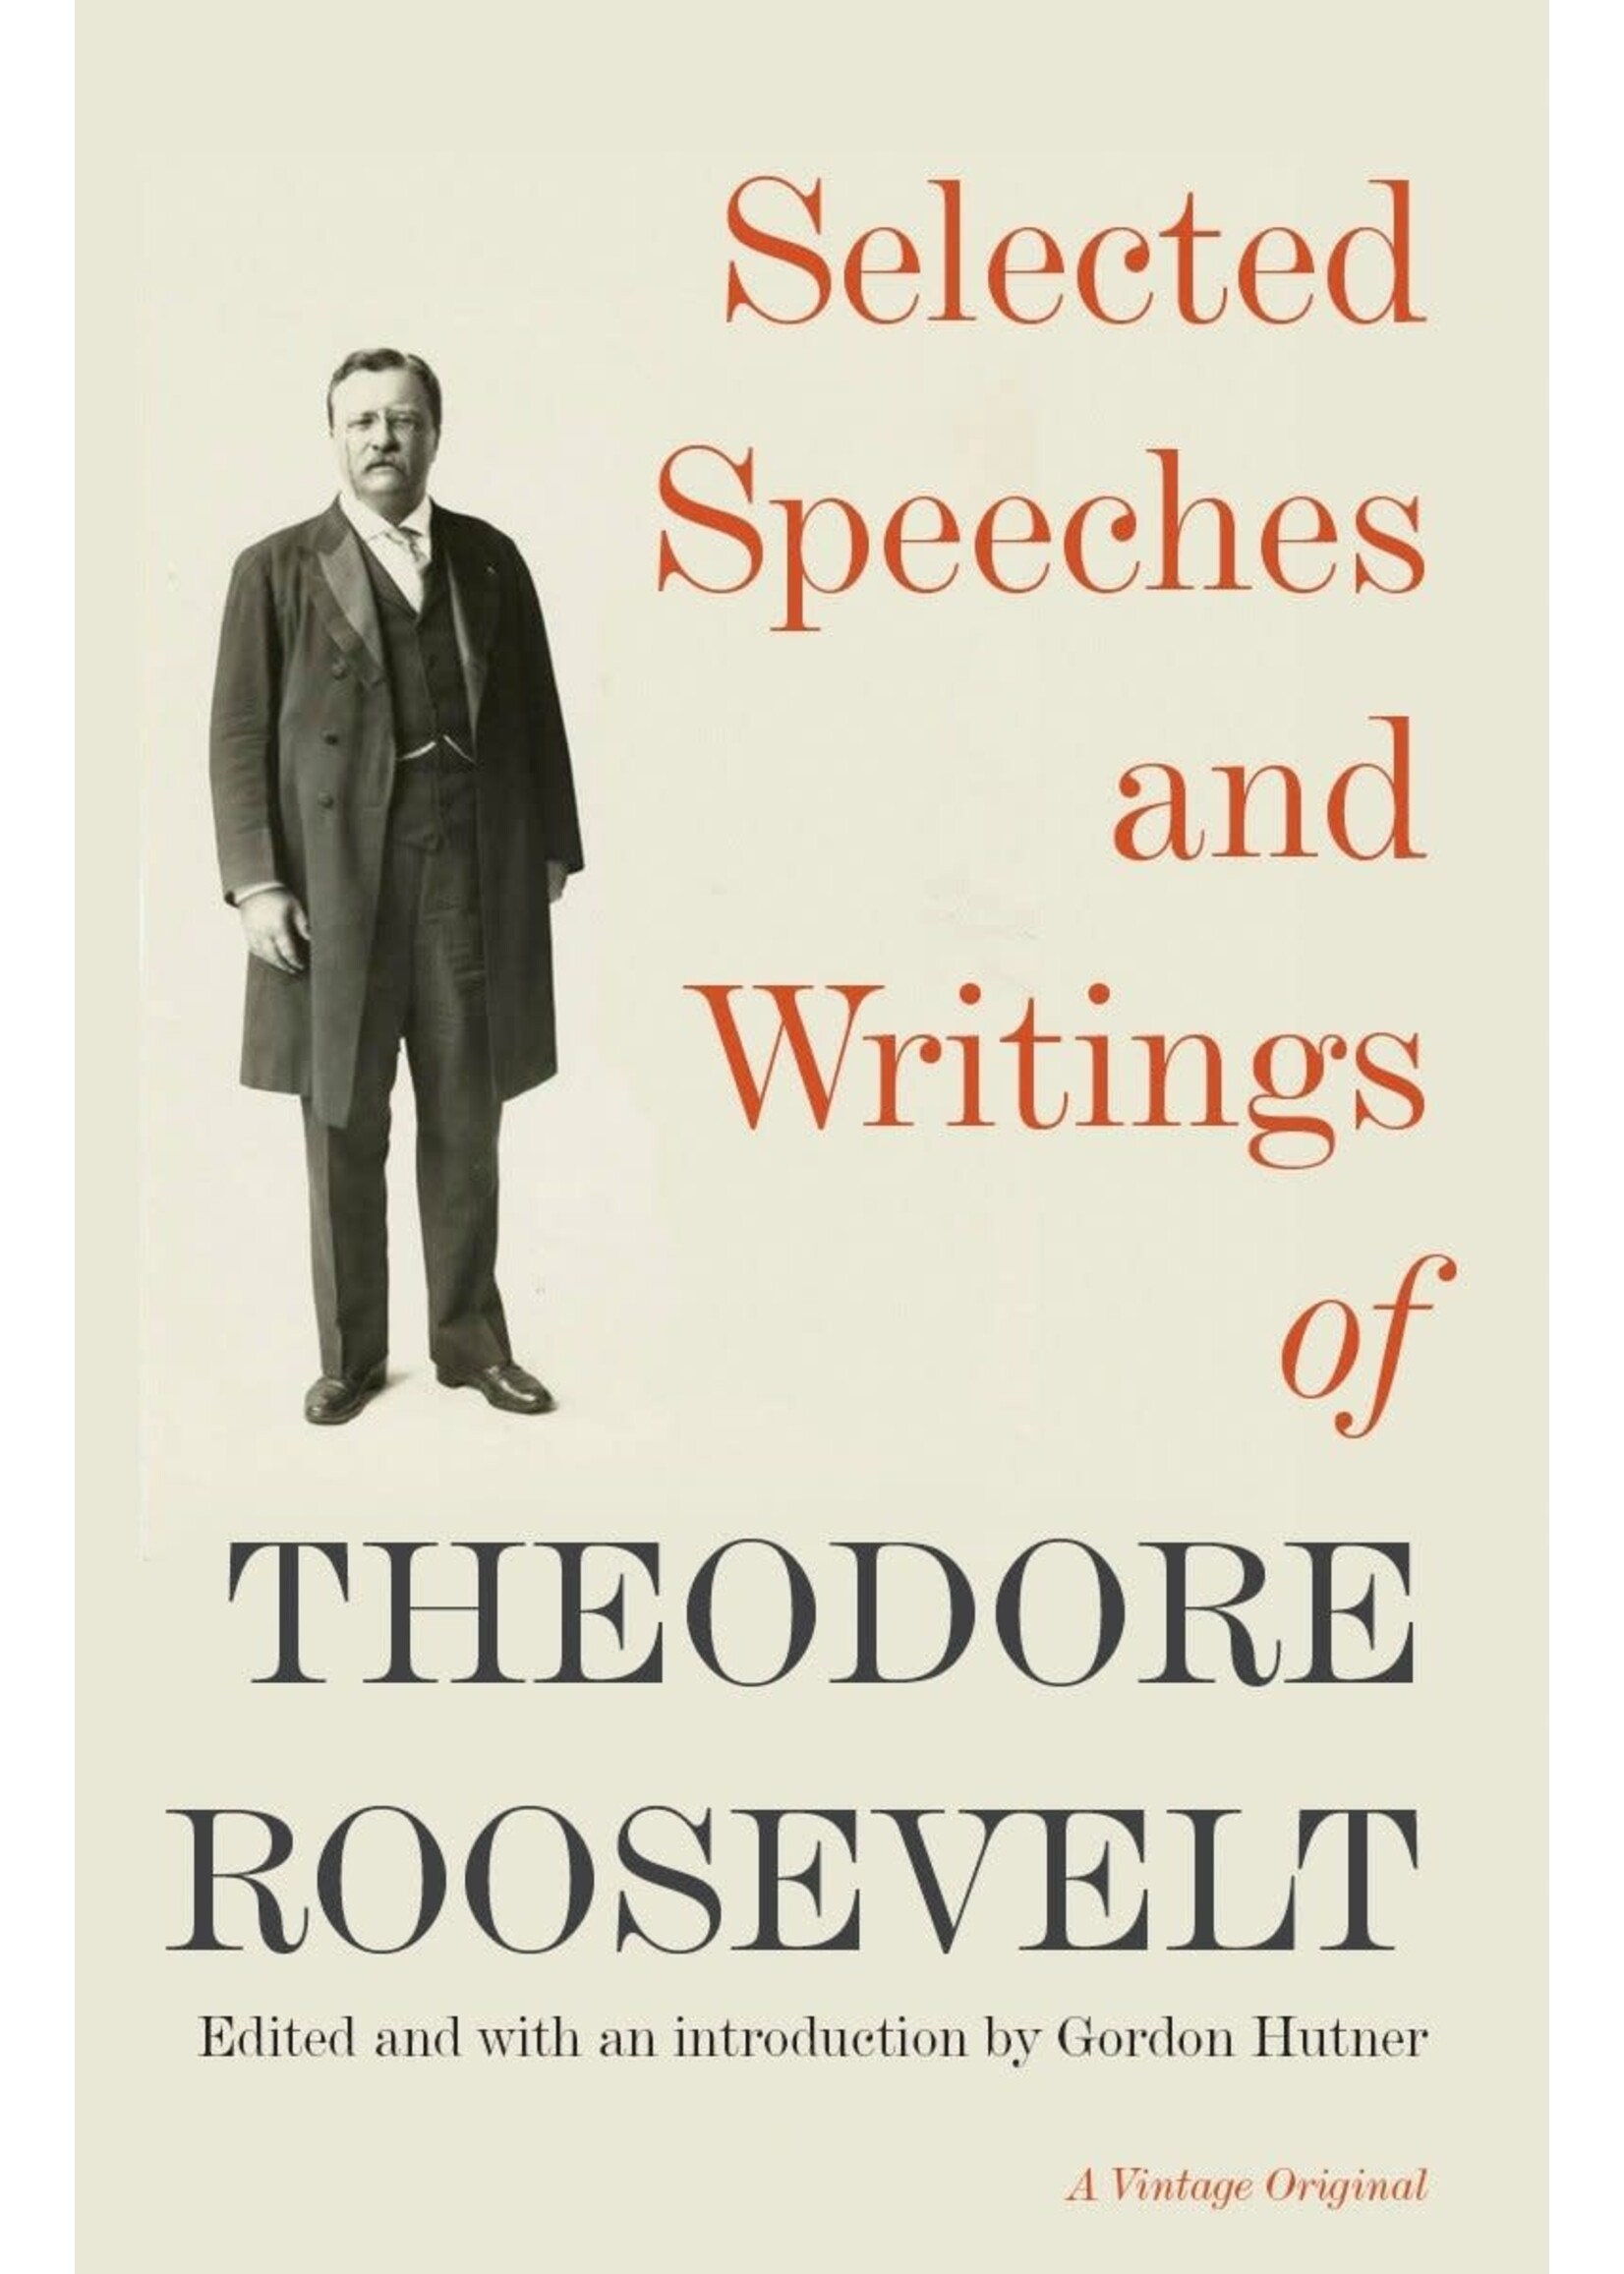 Selected Speeches and Writings of Theodore Roosevelt